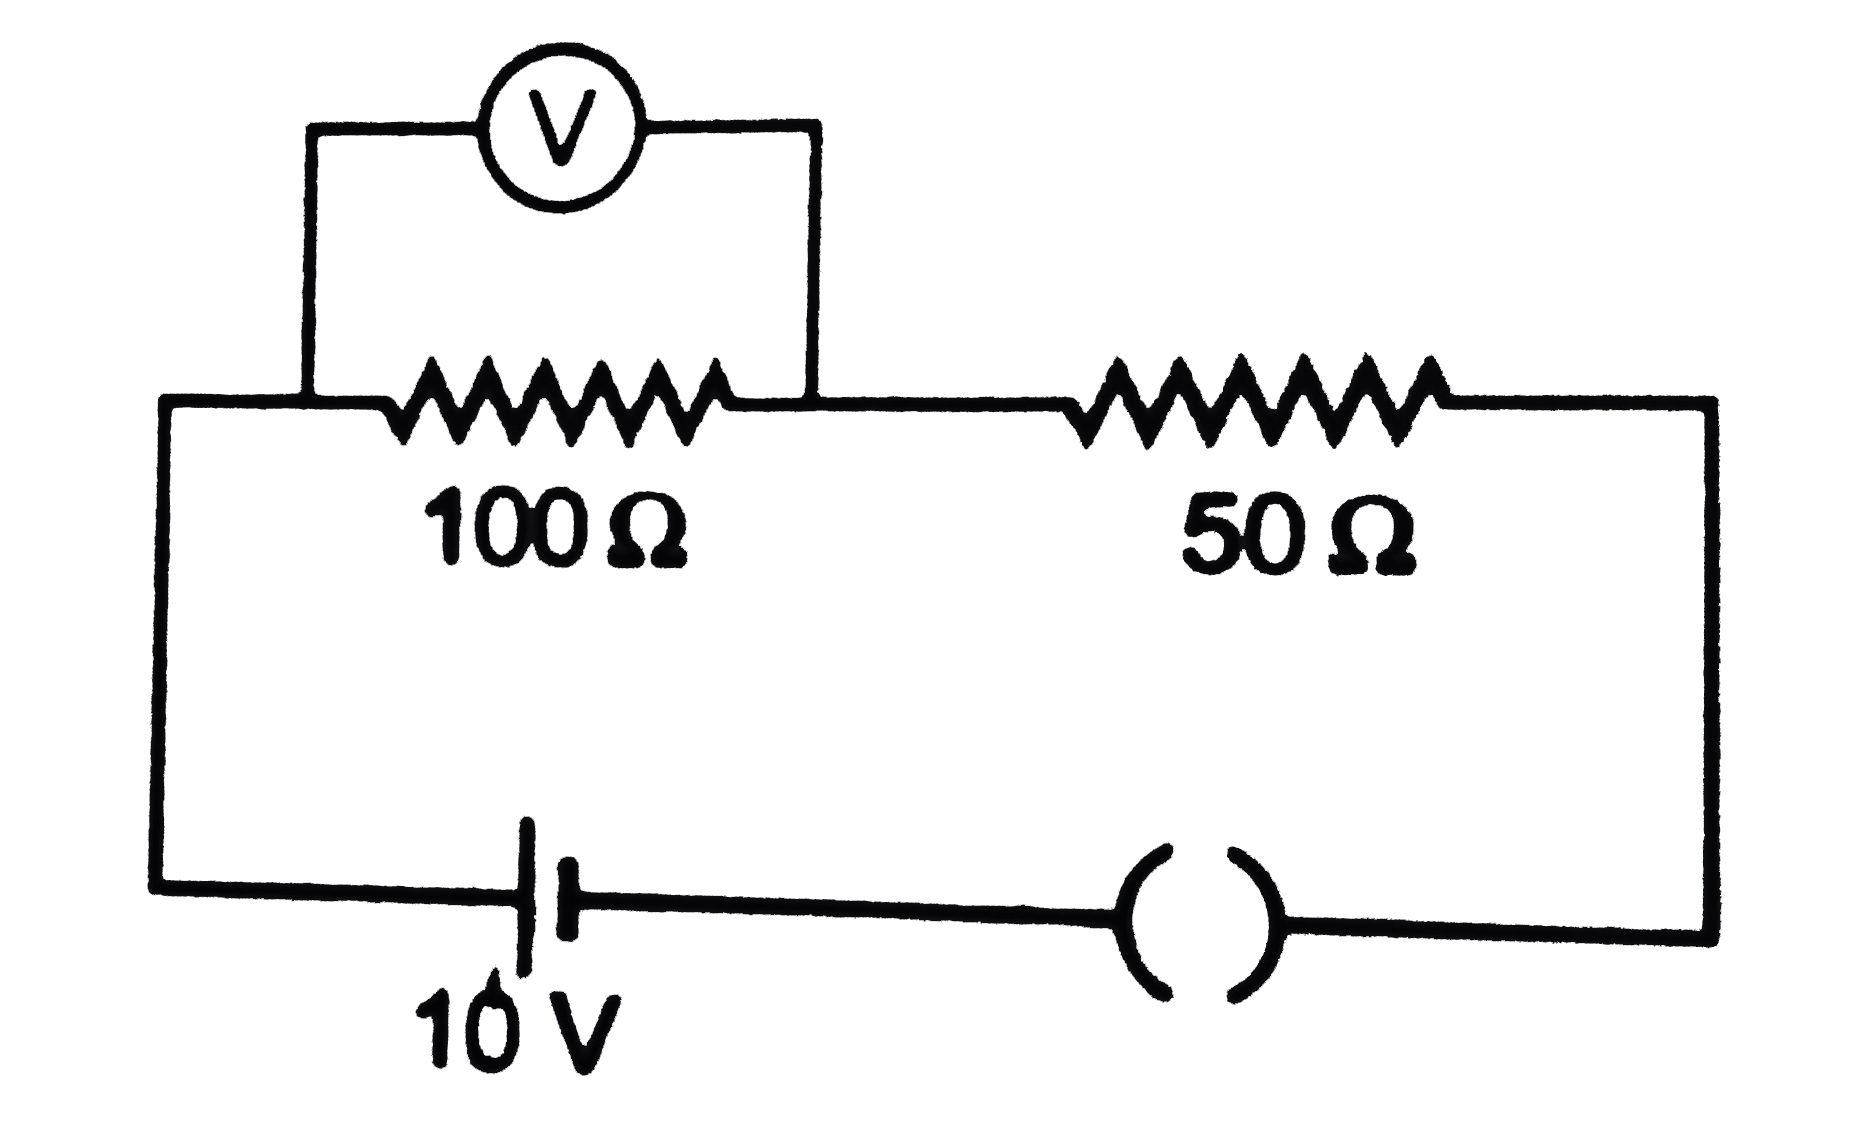 In the given circuit, the voltmeter records 5 V. The resistance of the voltmeter in Omega is